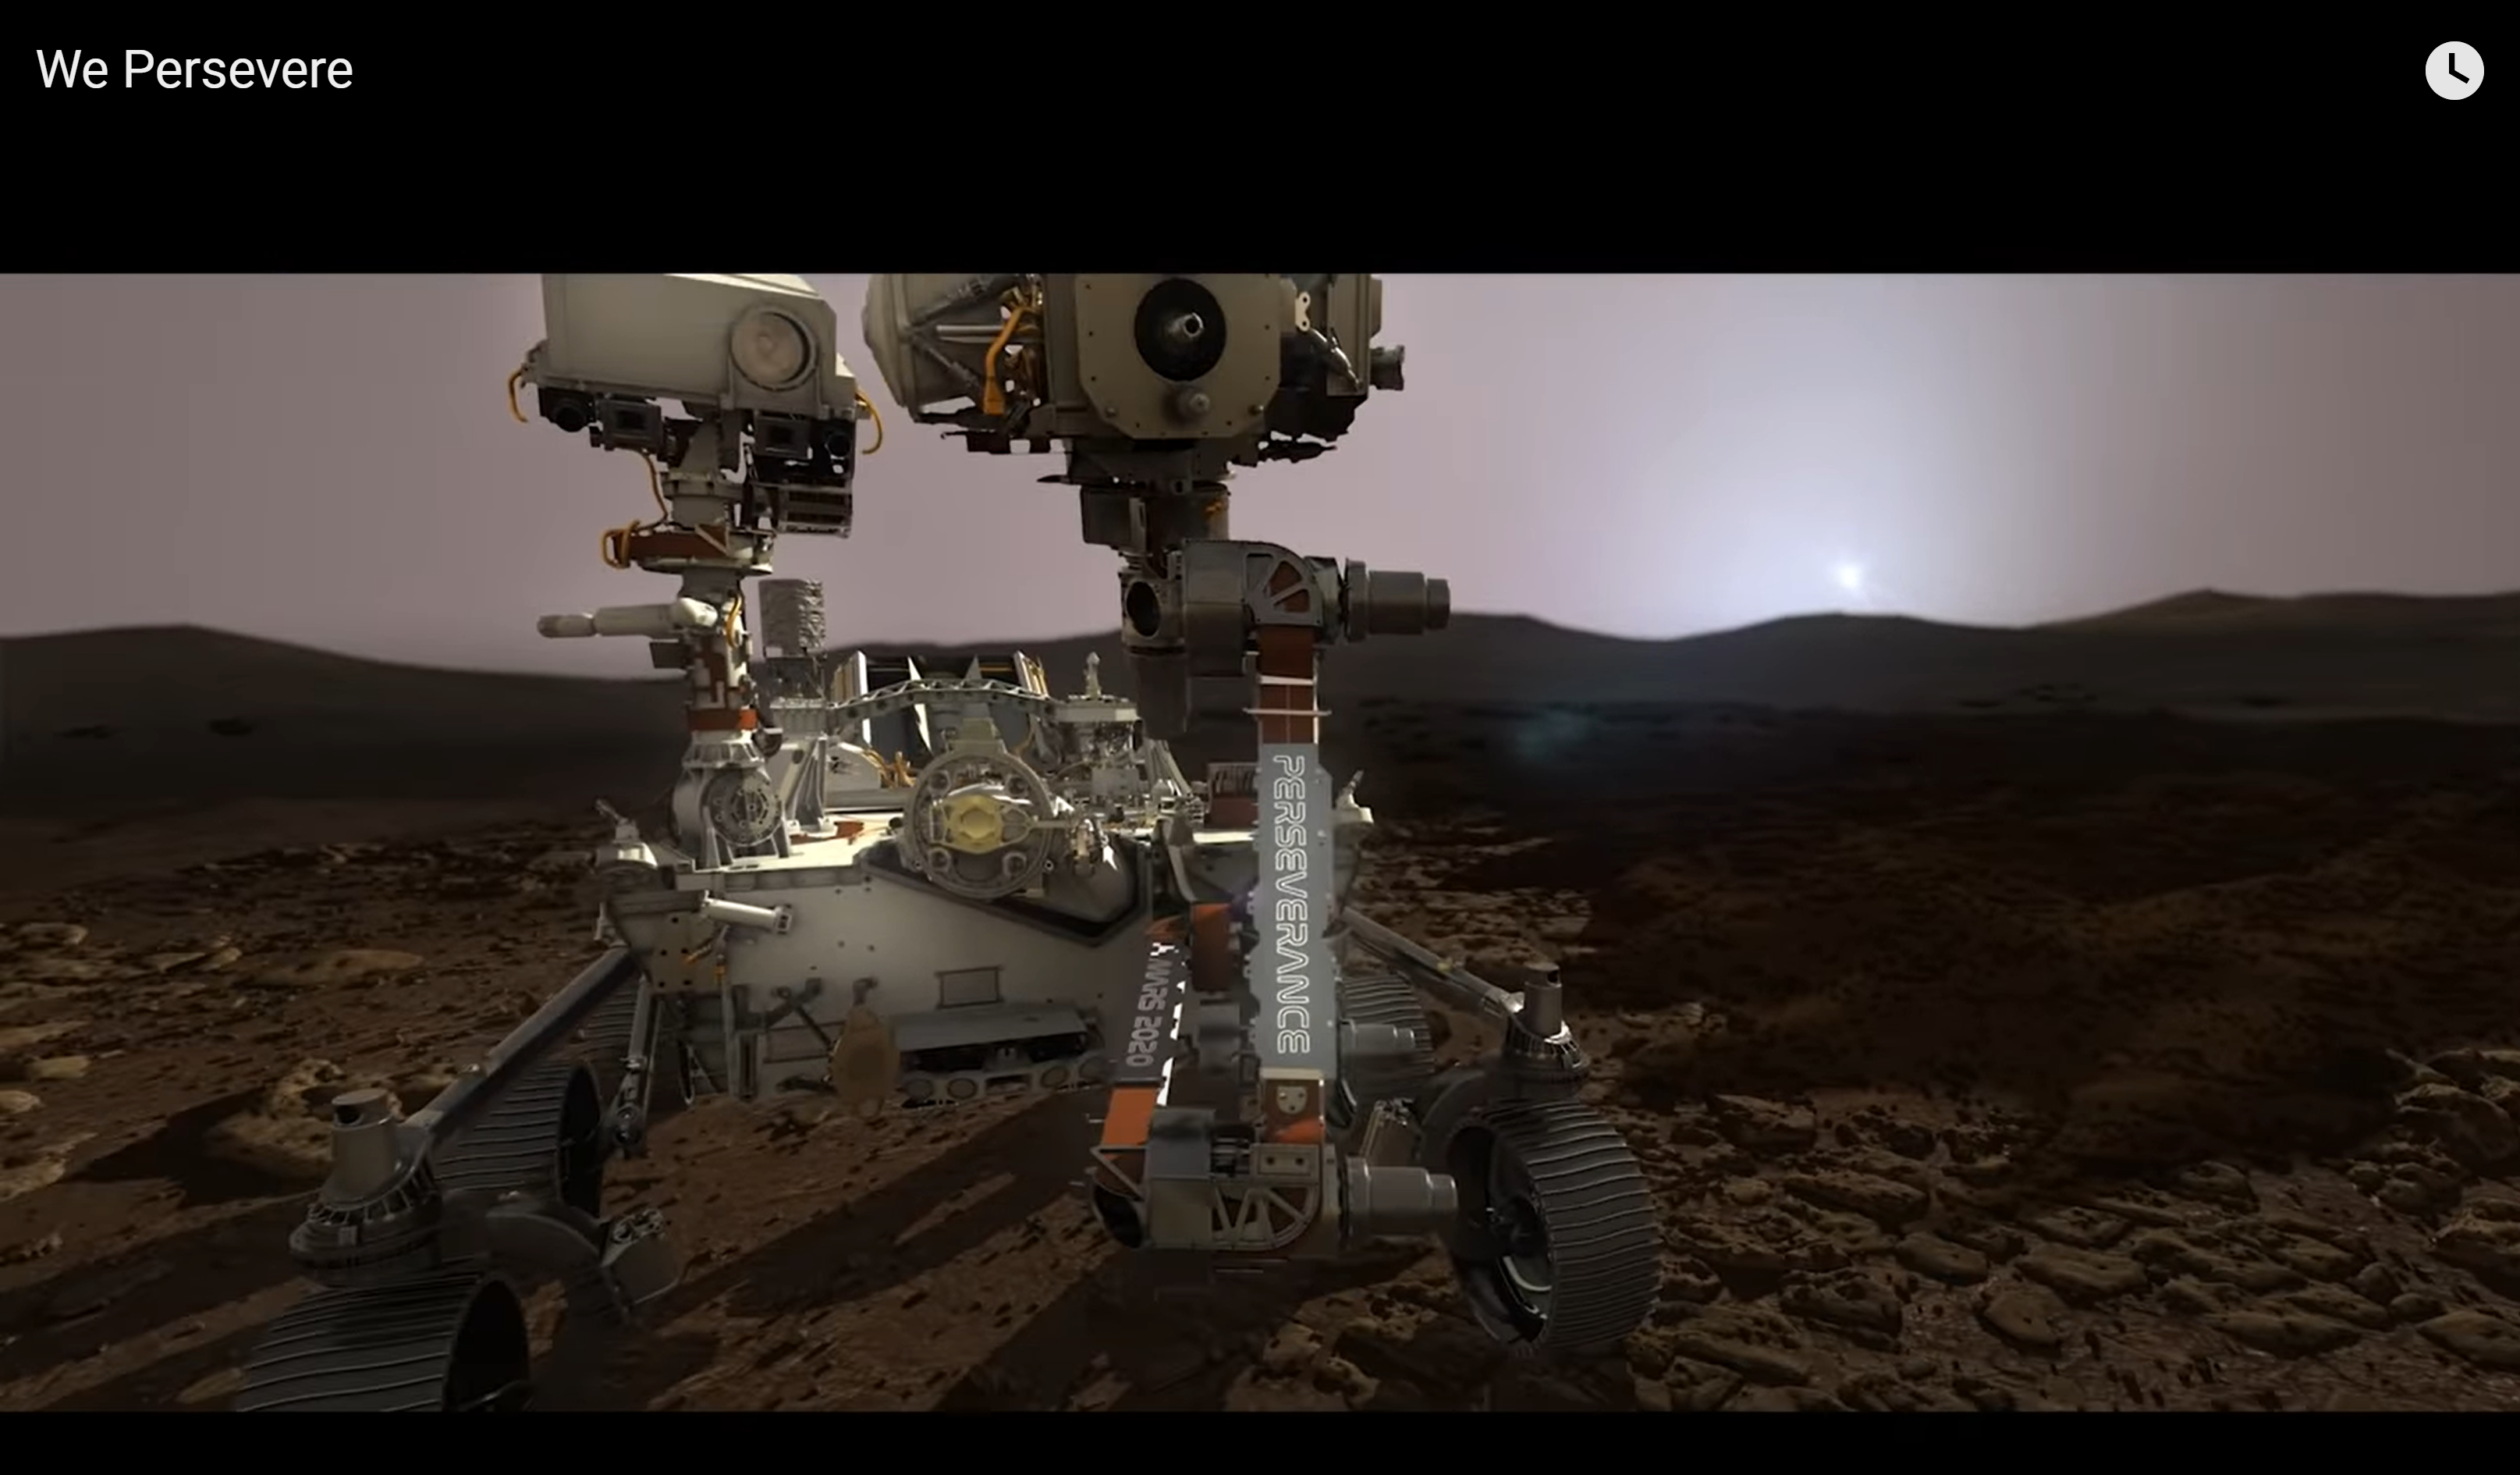 We Persevere: Mars 2020 Perseverance Rover Video